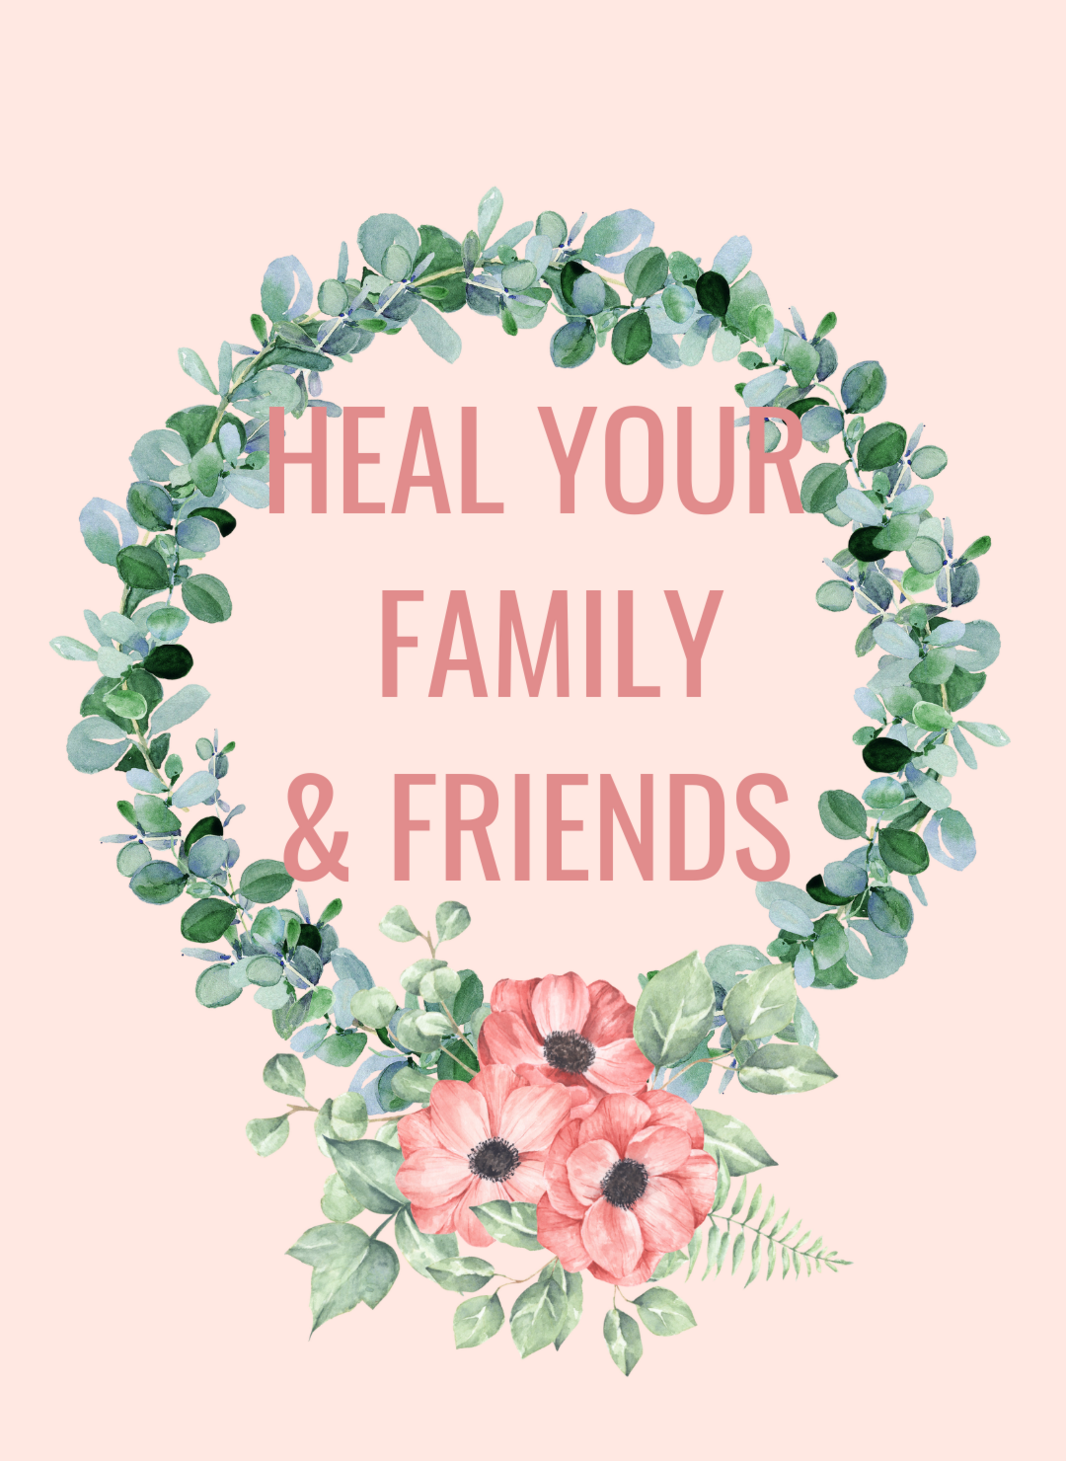 Heal your family